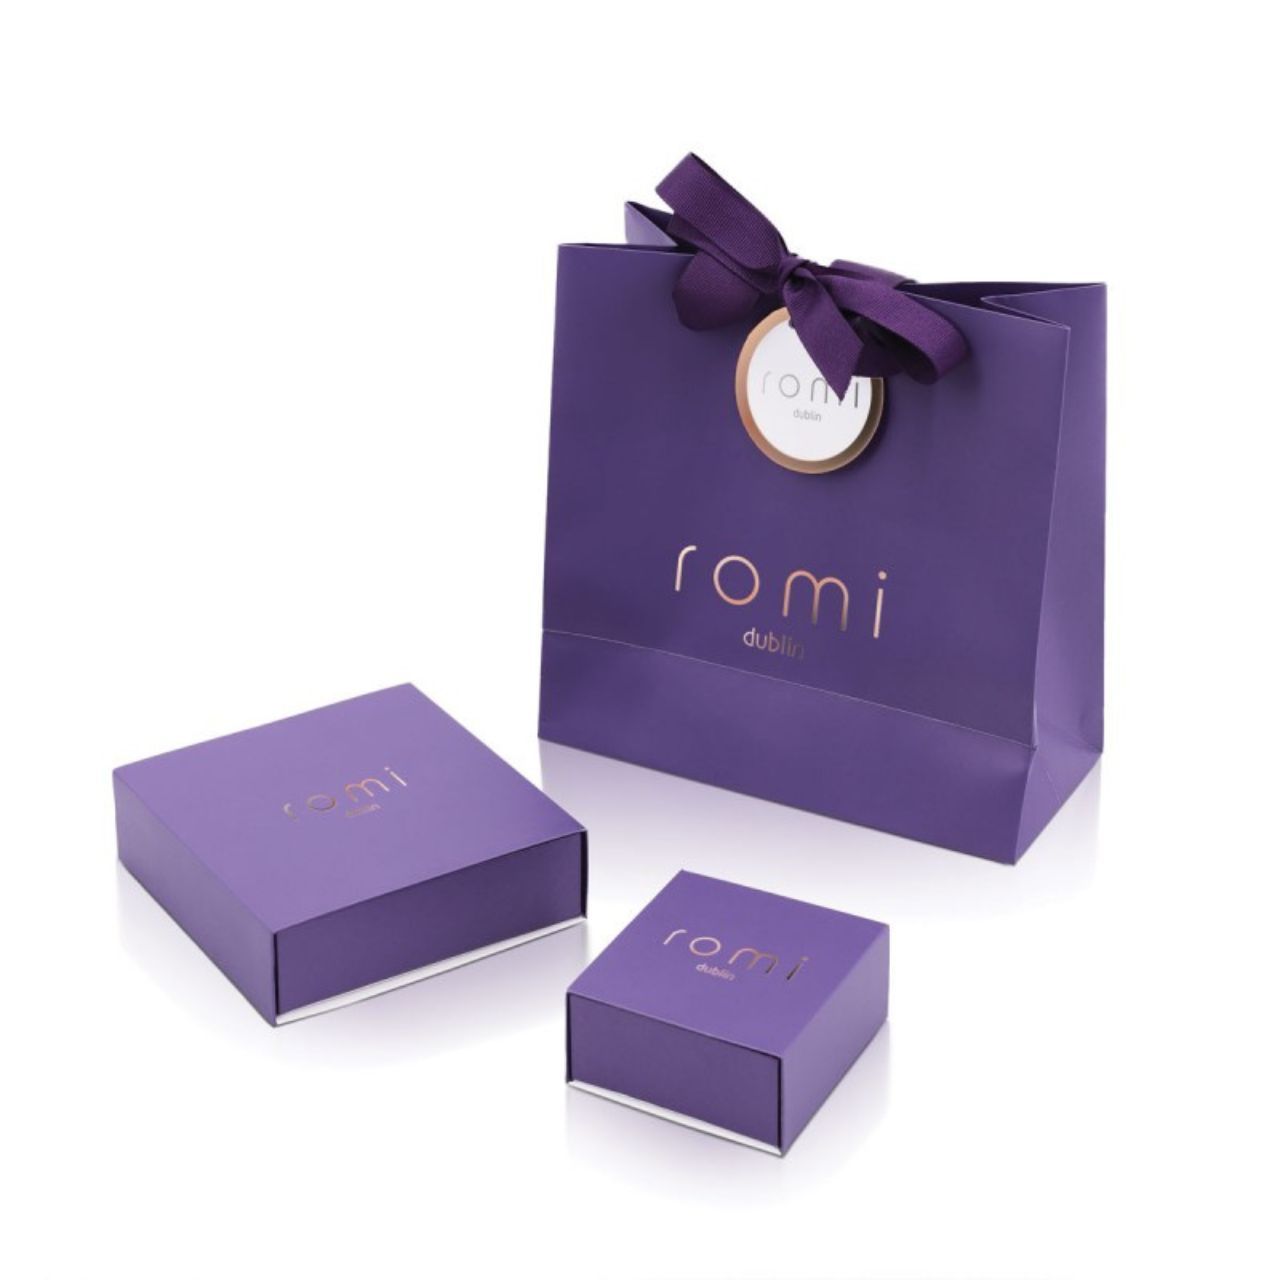 Romi Dublin Rose Gold Knot Necklace  The Knot of love, to show the strength between partners and friends, the Knot is a symbol of this link of love and friendship that makes our lives what they are.